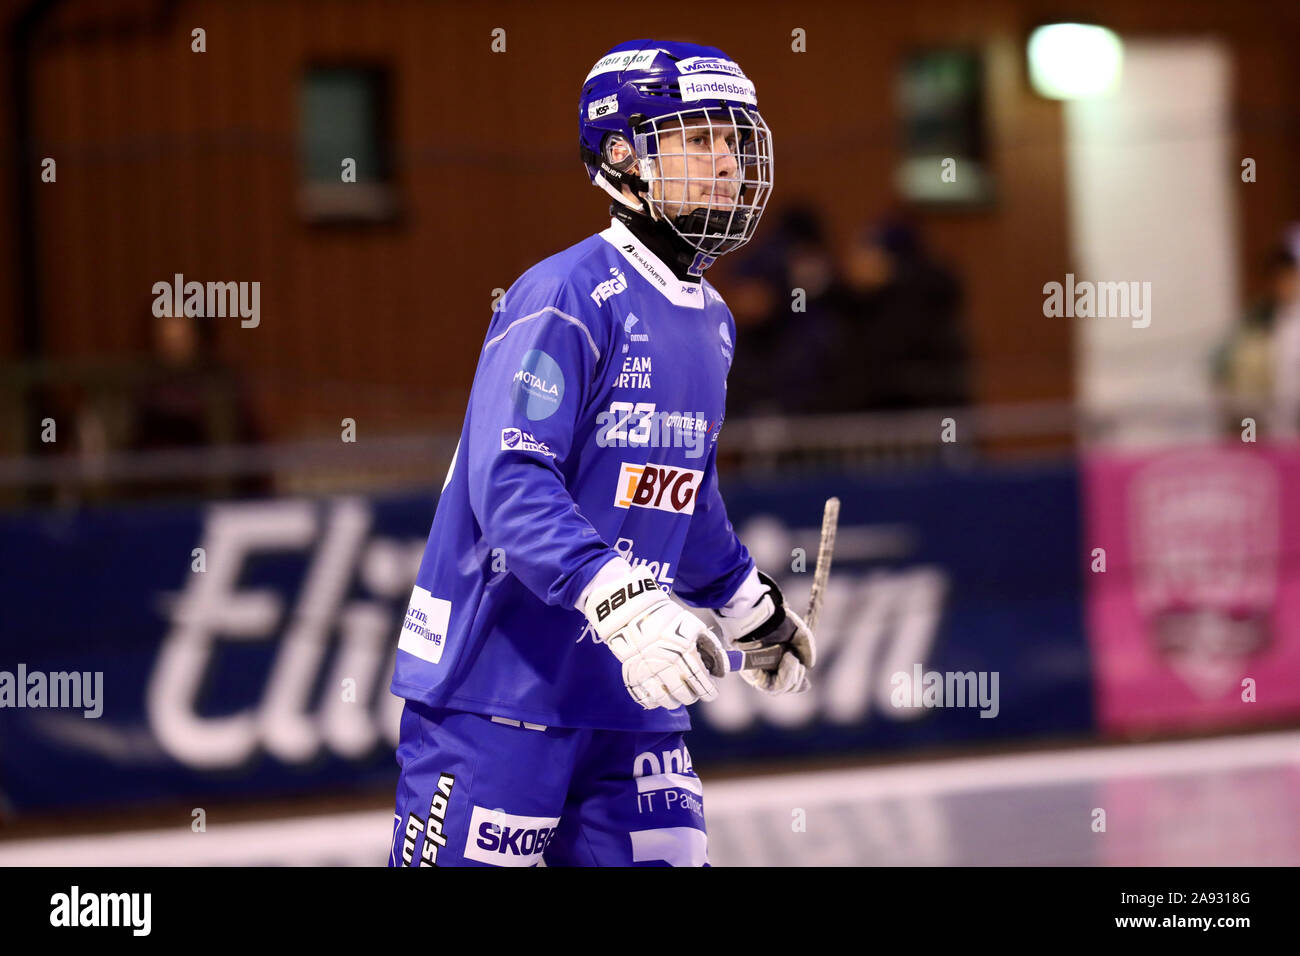 Elitserien 2019 2020 High Resolution Stock Photography and Images - Alamy